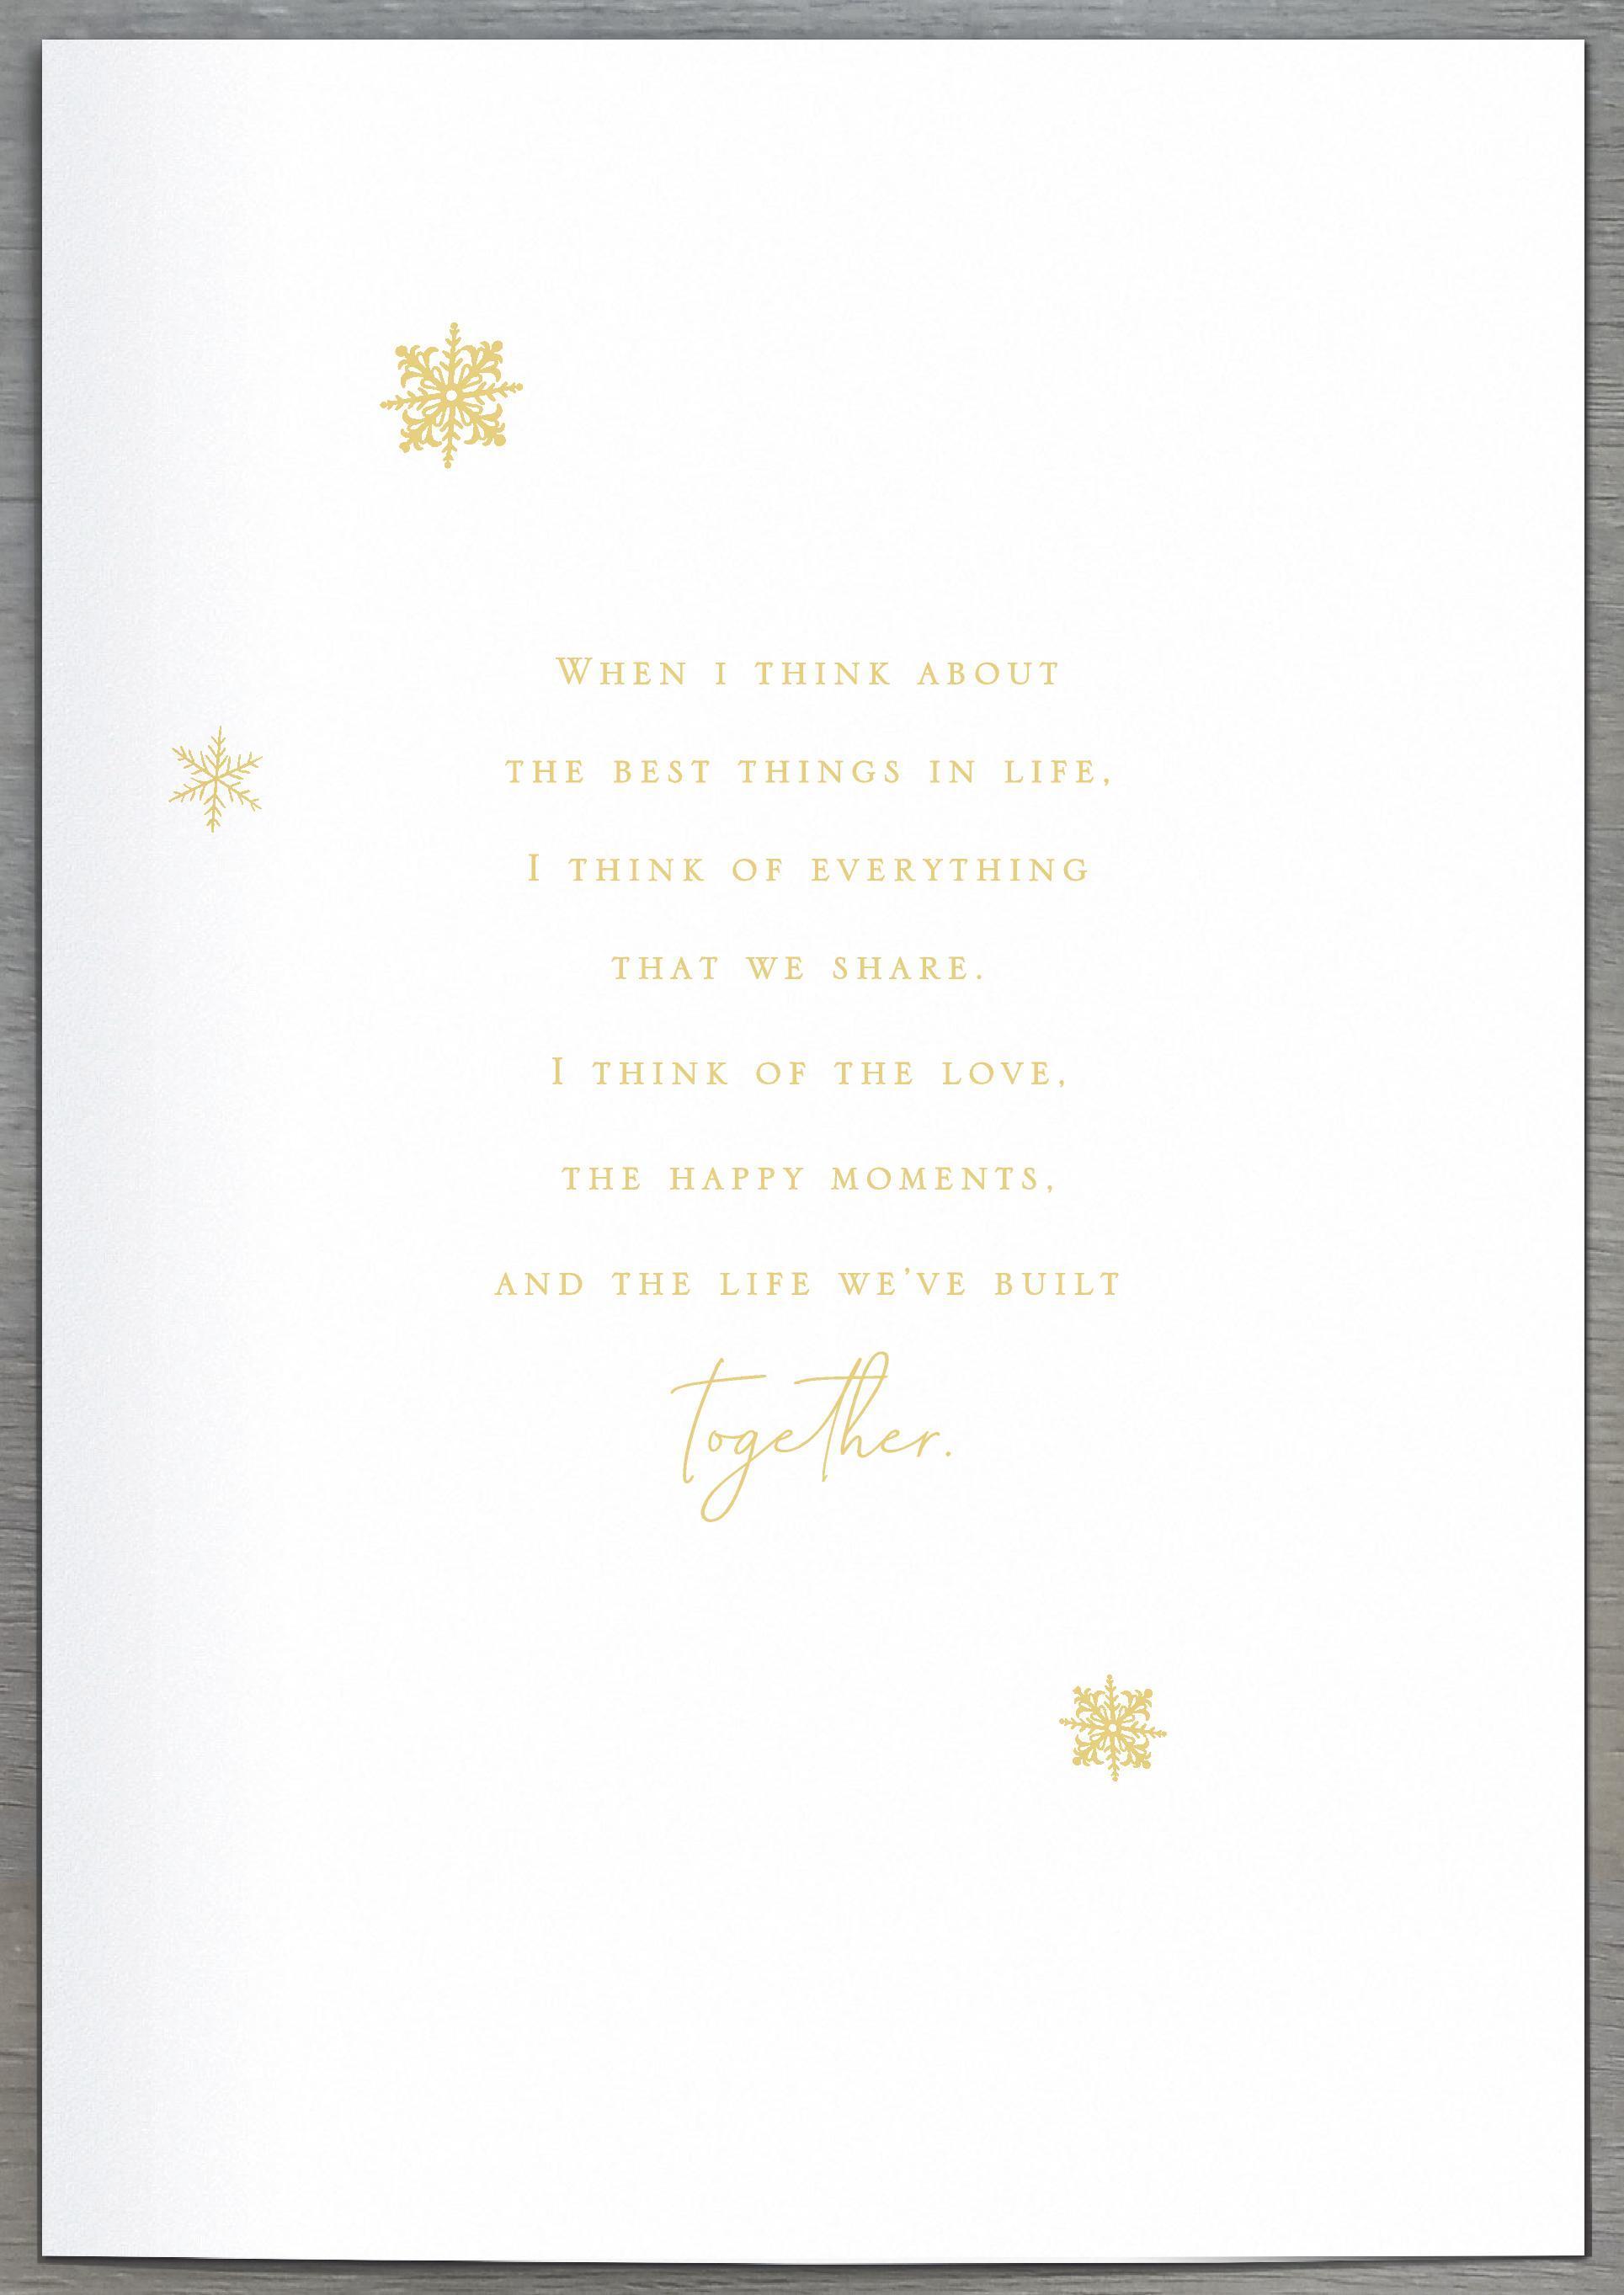 One I Love Christmas Card - I Feel Lucky To Have You By My Side & Heart With Roses